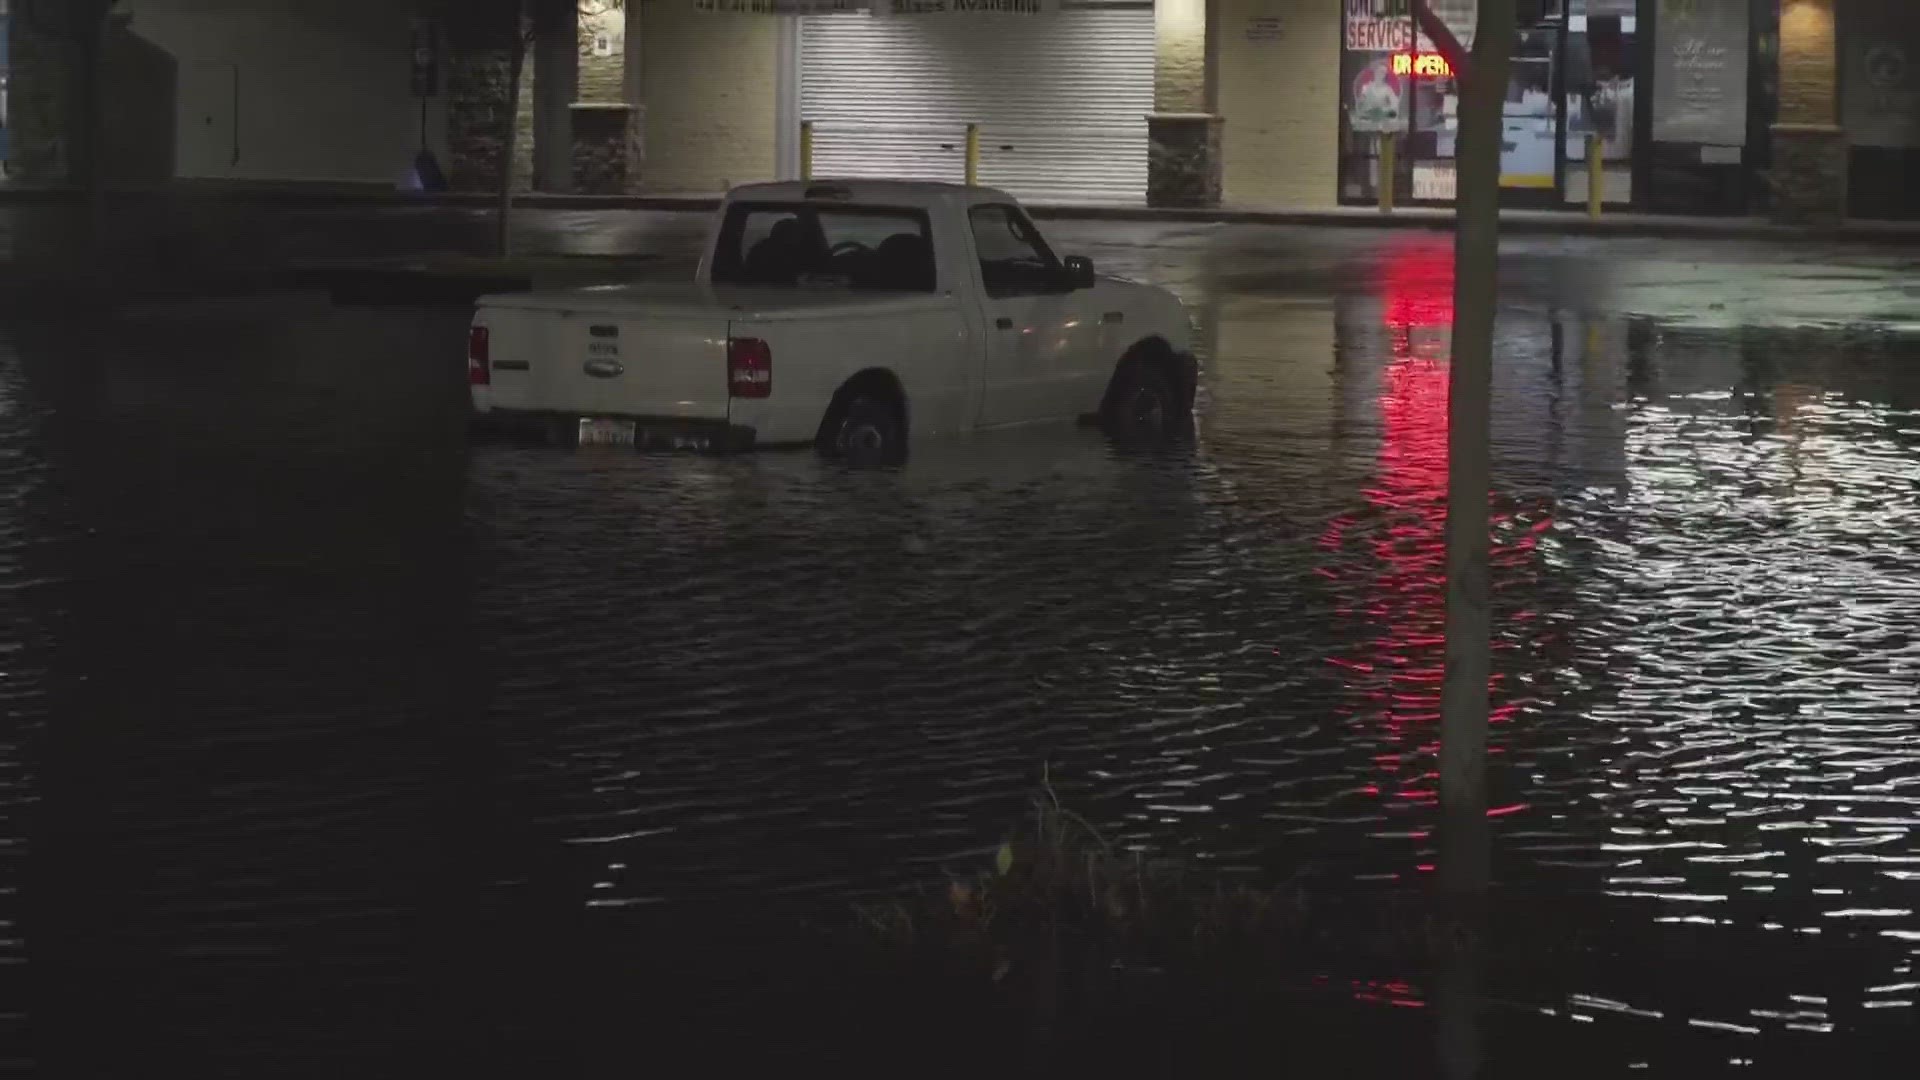 A strong storm brought localized flooding into parts of Sacramento Tuesday night, including impacts along the roadways.